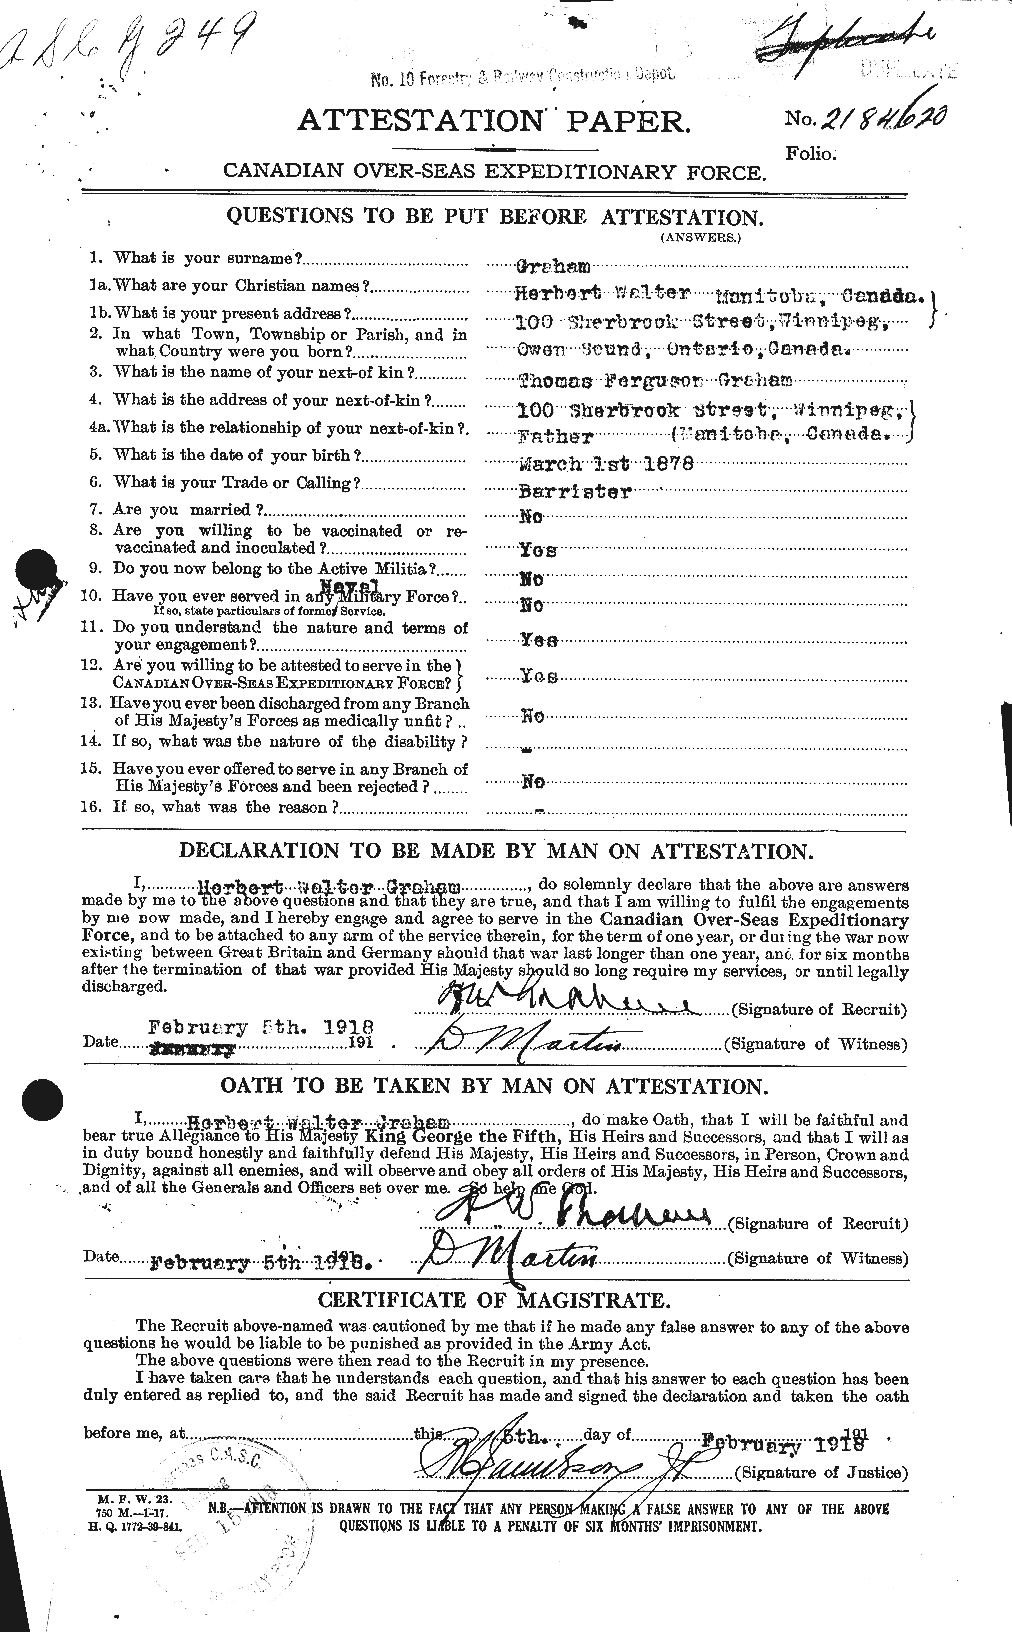 Personnel Records of the First World War - CEF 357745a